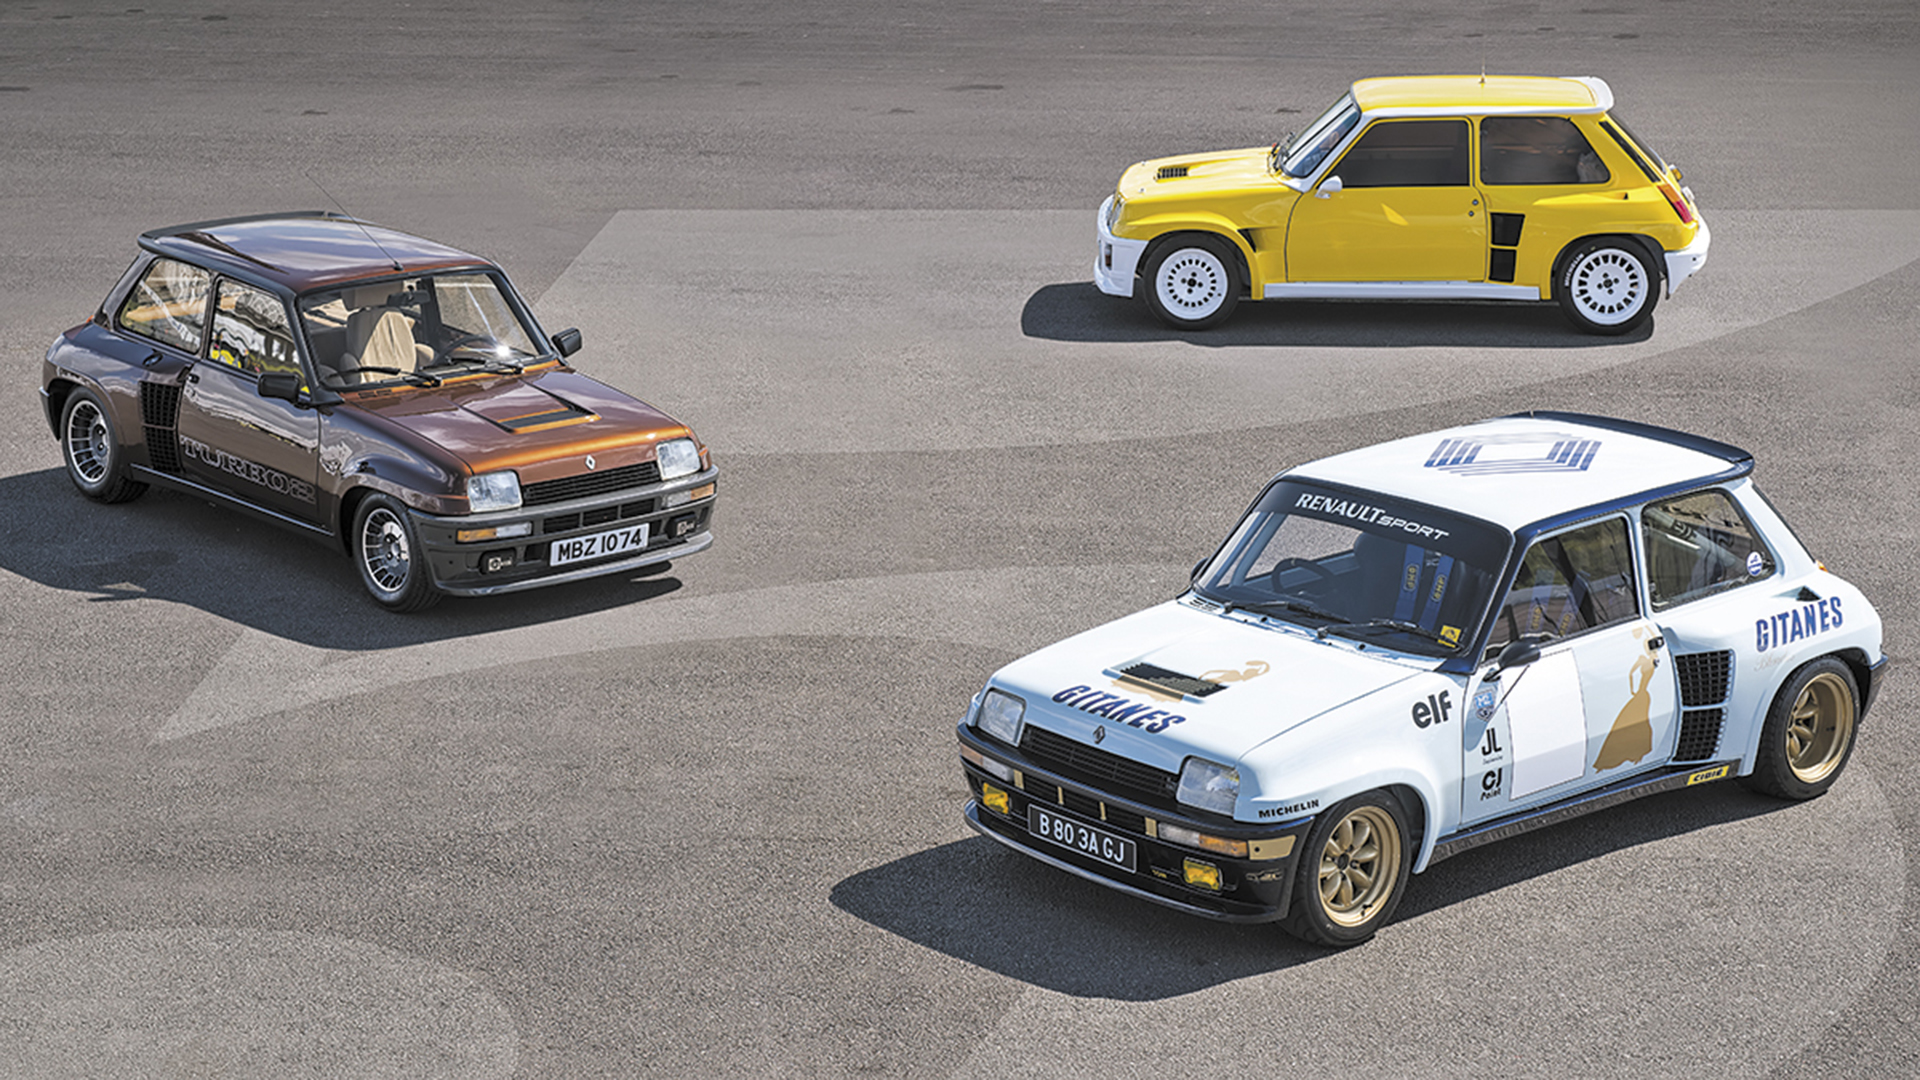 The Most Famous Renault 5 Turbo In The 80S, Shone At The French, European And World Rally Championships